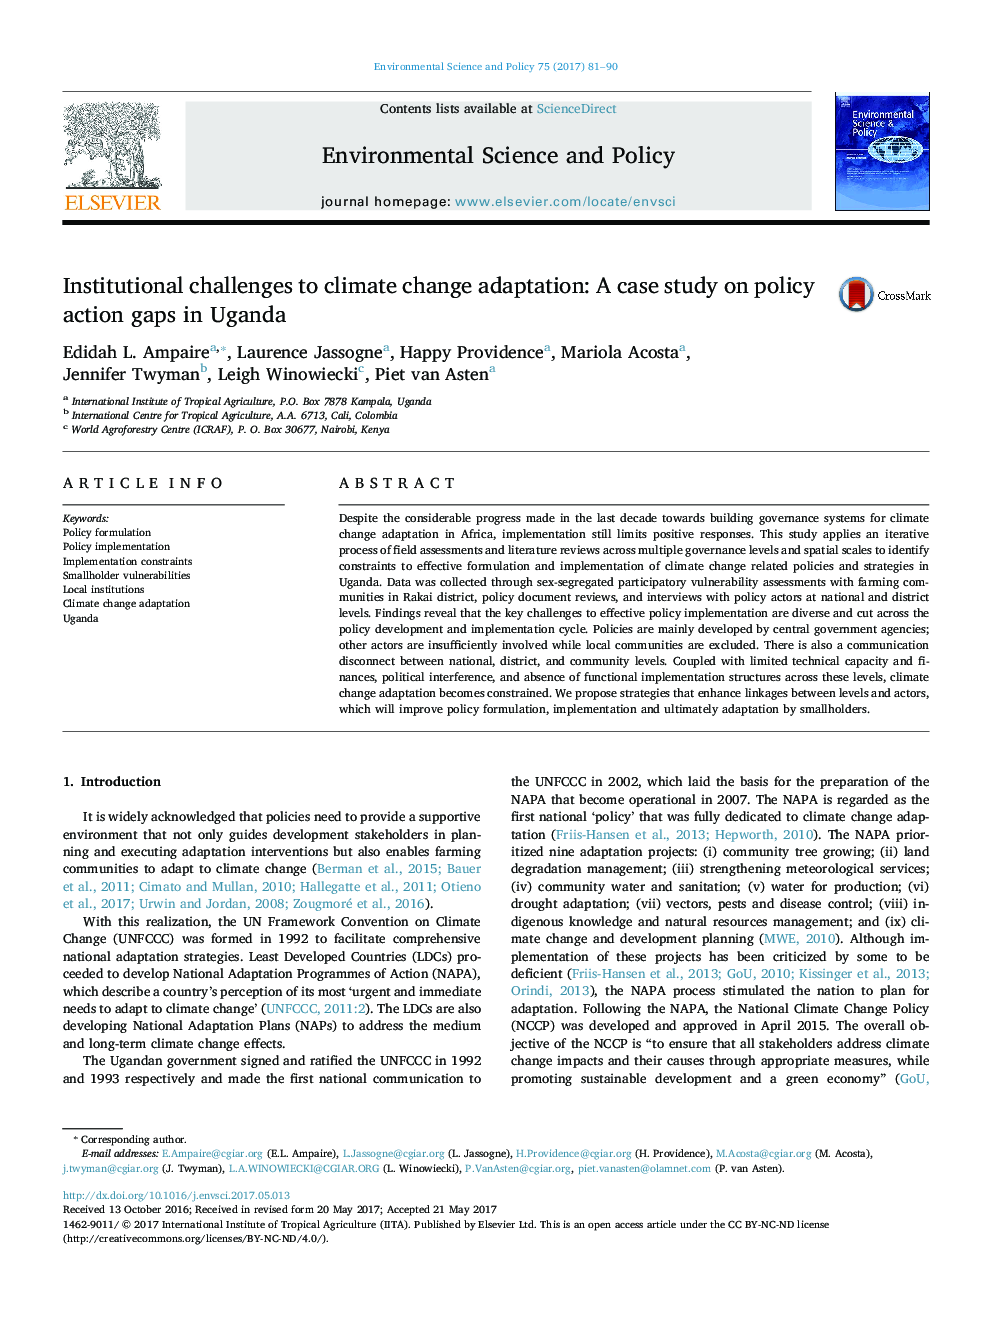 Institutional challenges to climate change adaptation: A case study on policy action gaps in Uganda